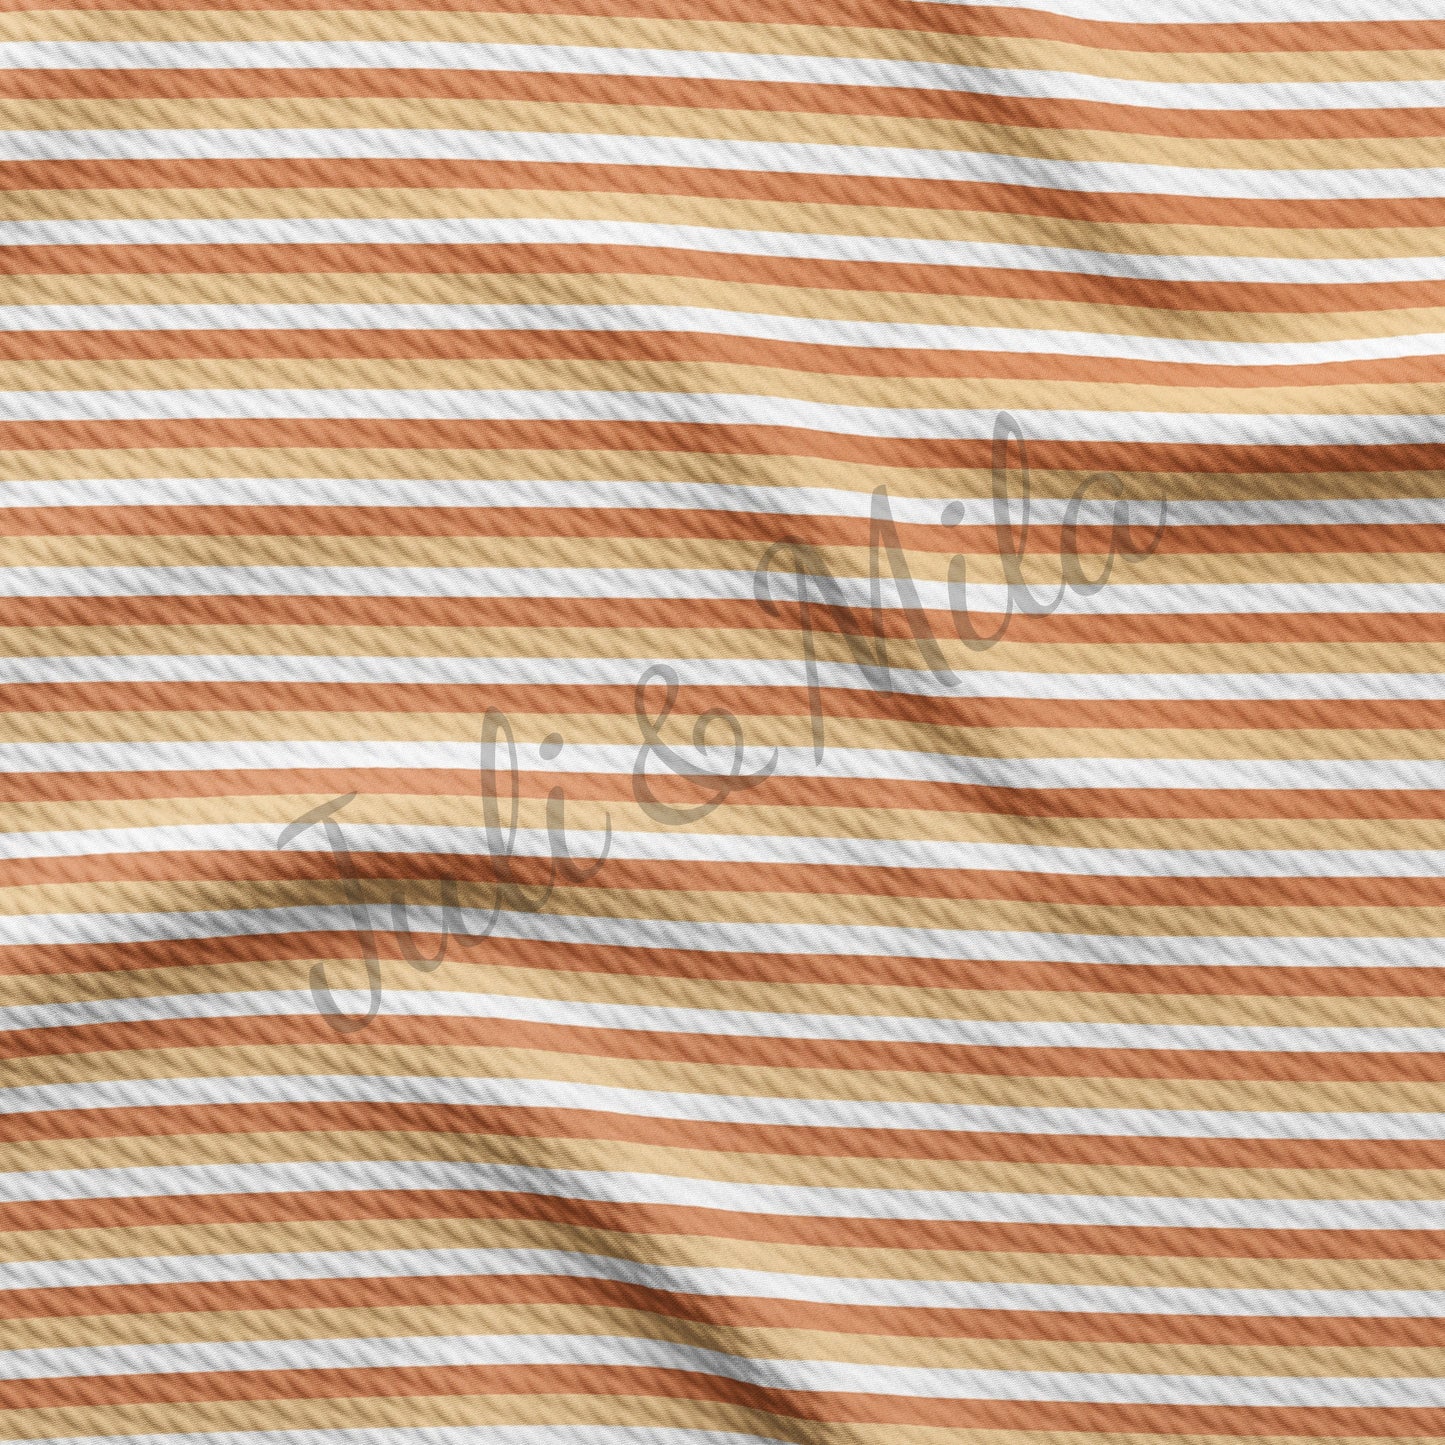 Stripes Bullet Textured Fabric stripes4